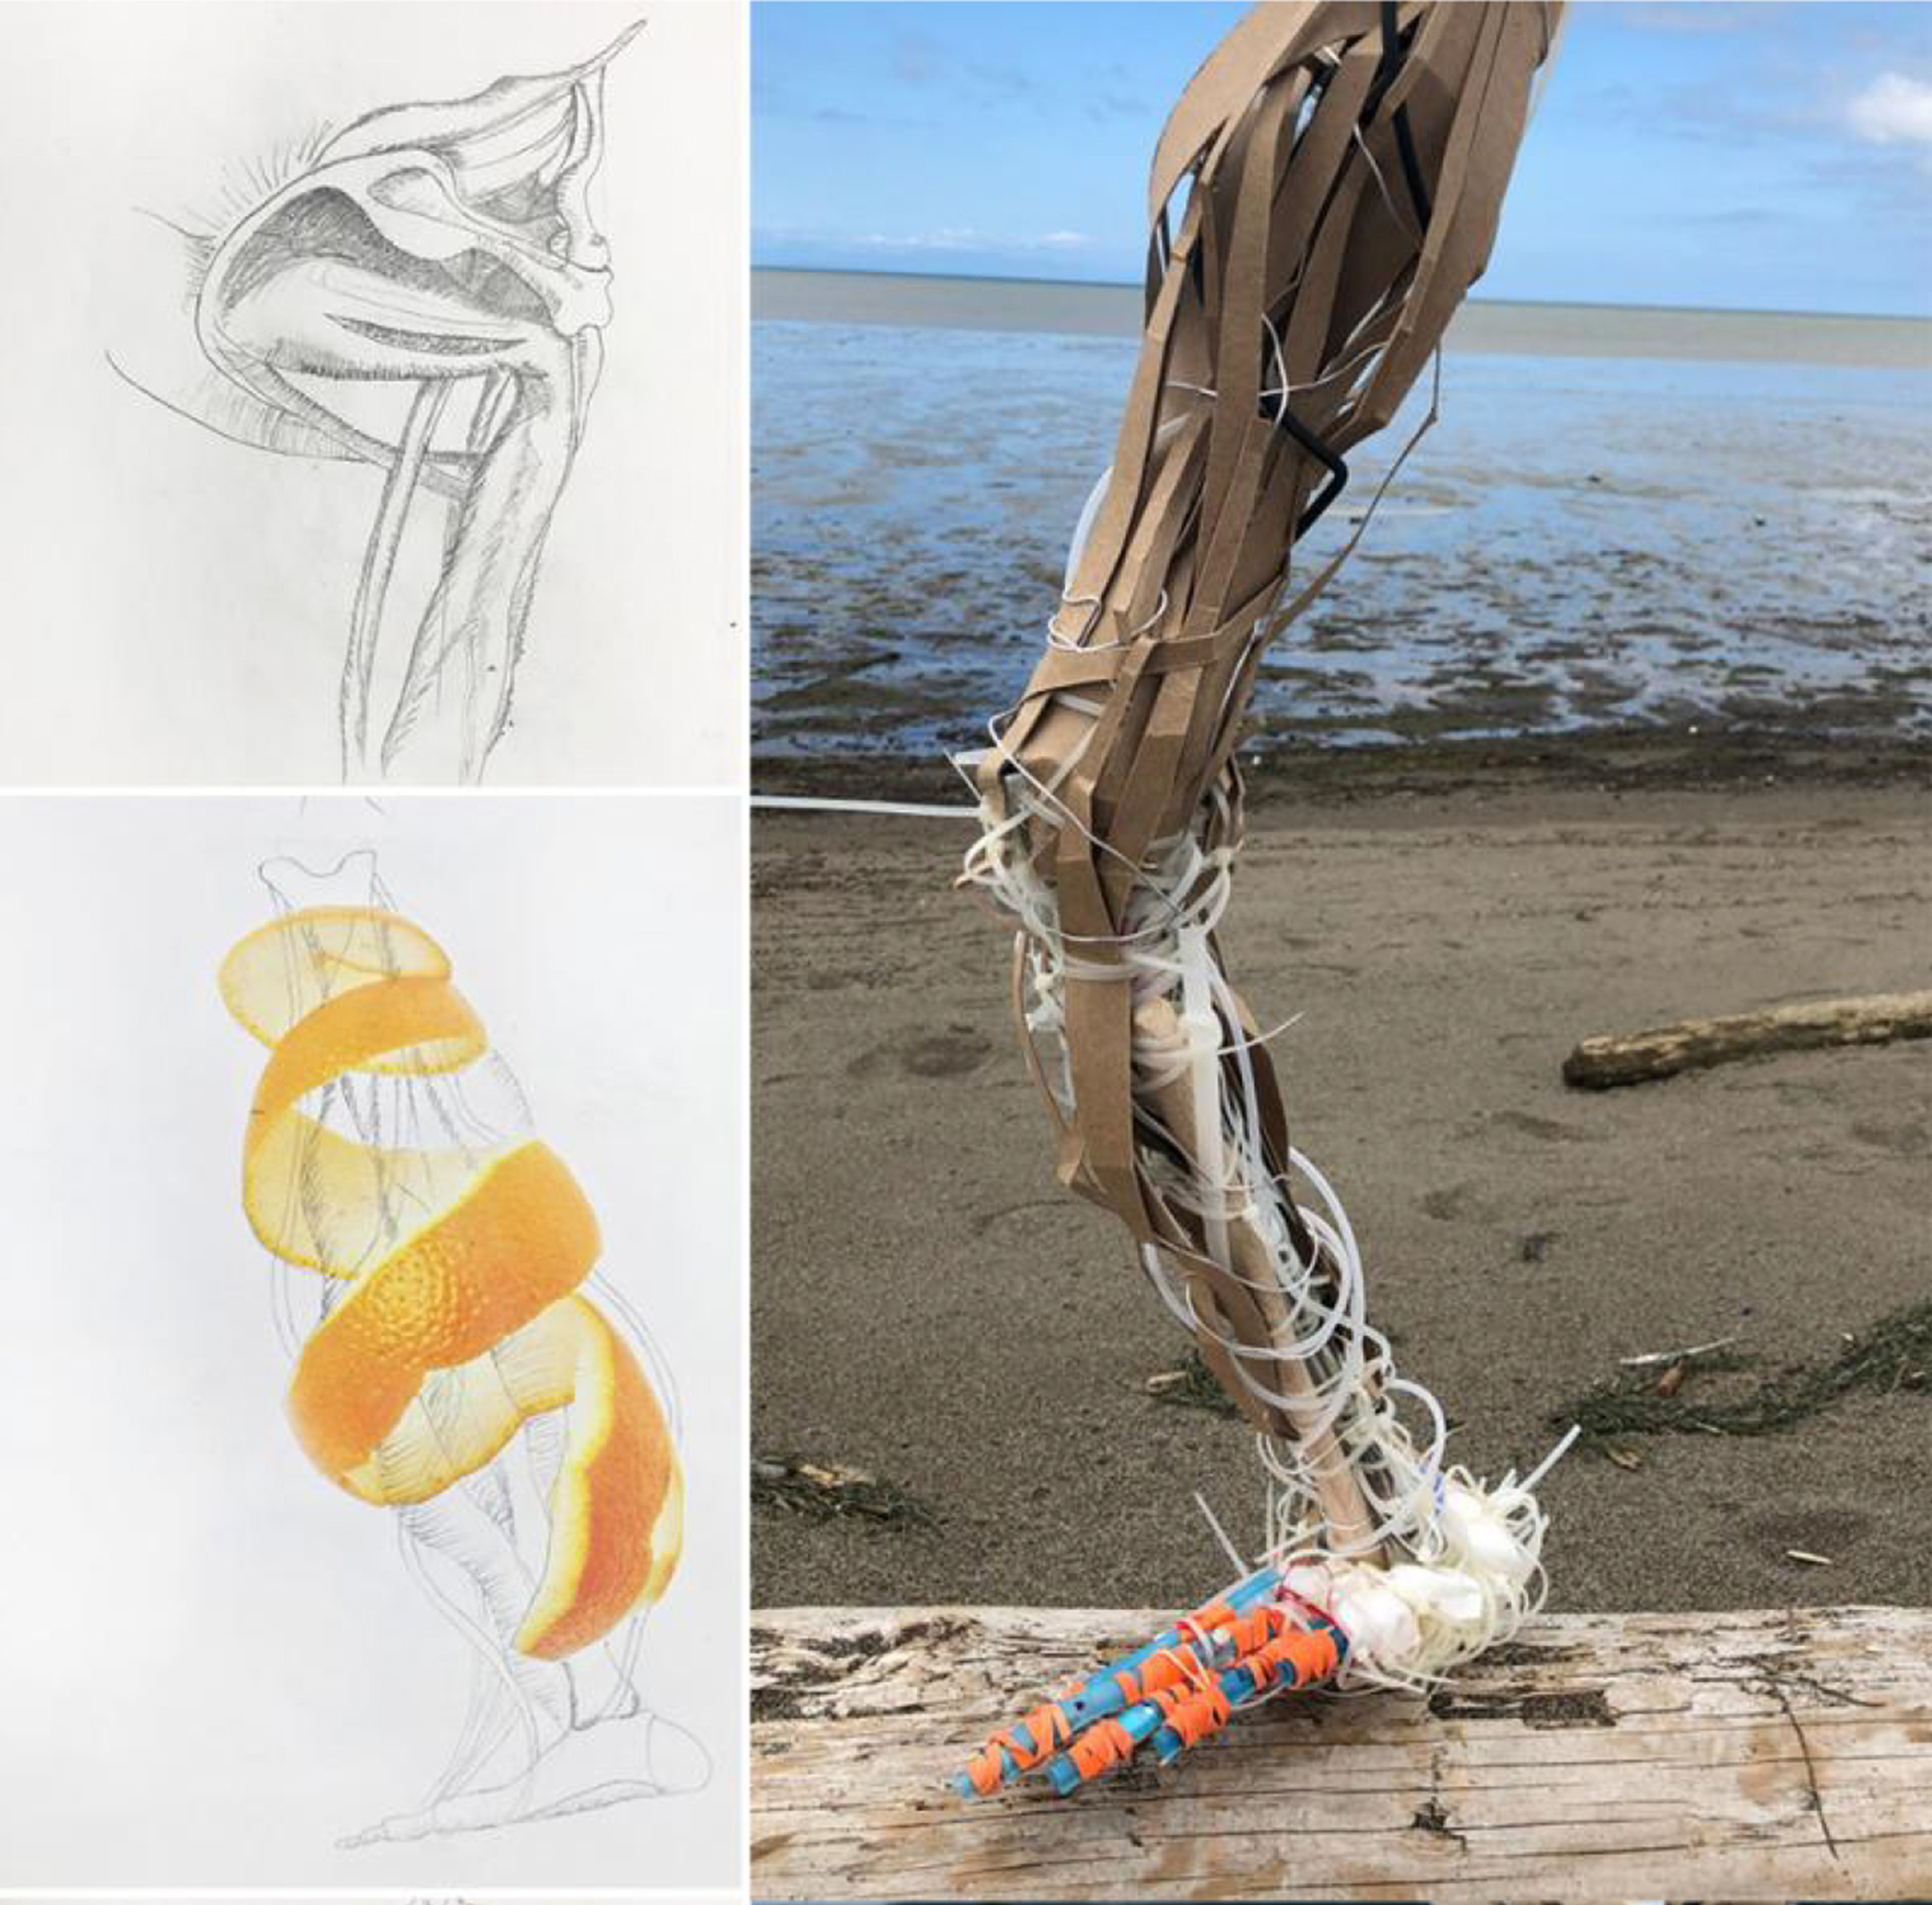 Sculpture of a leg and its ligaments on the right, with two sketches of the sculpture on the left